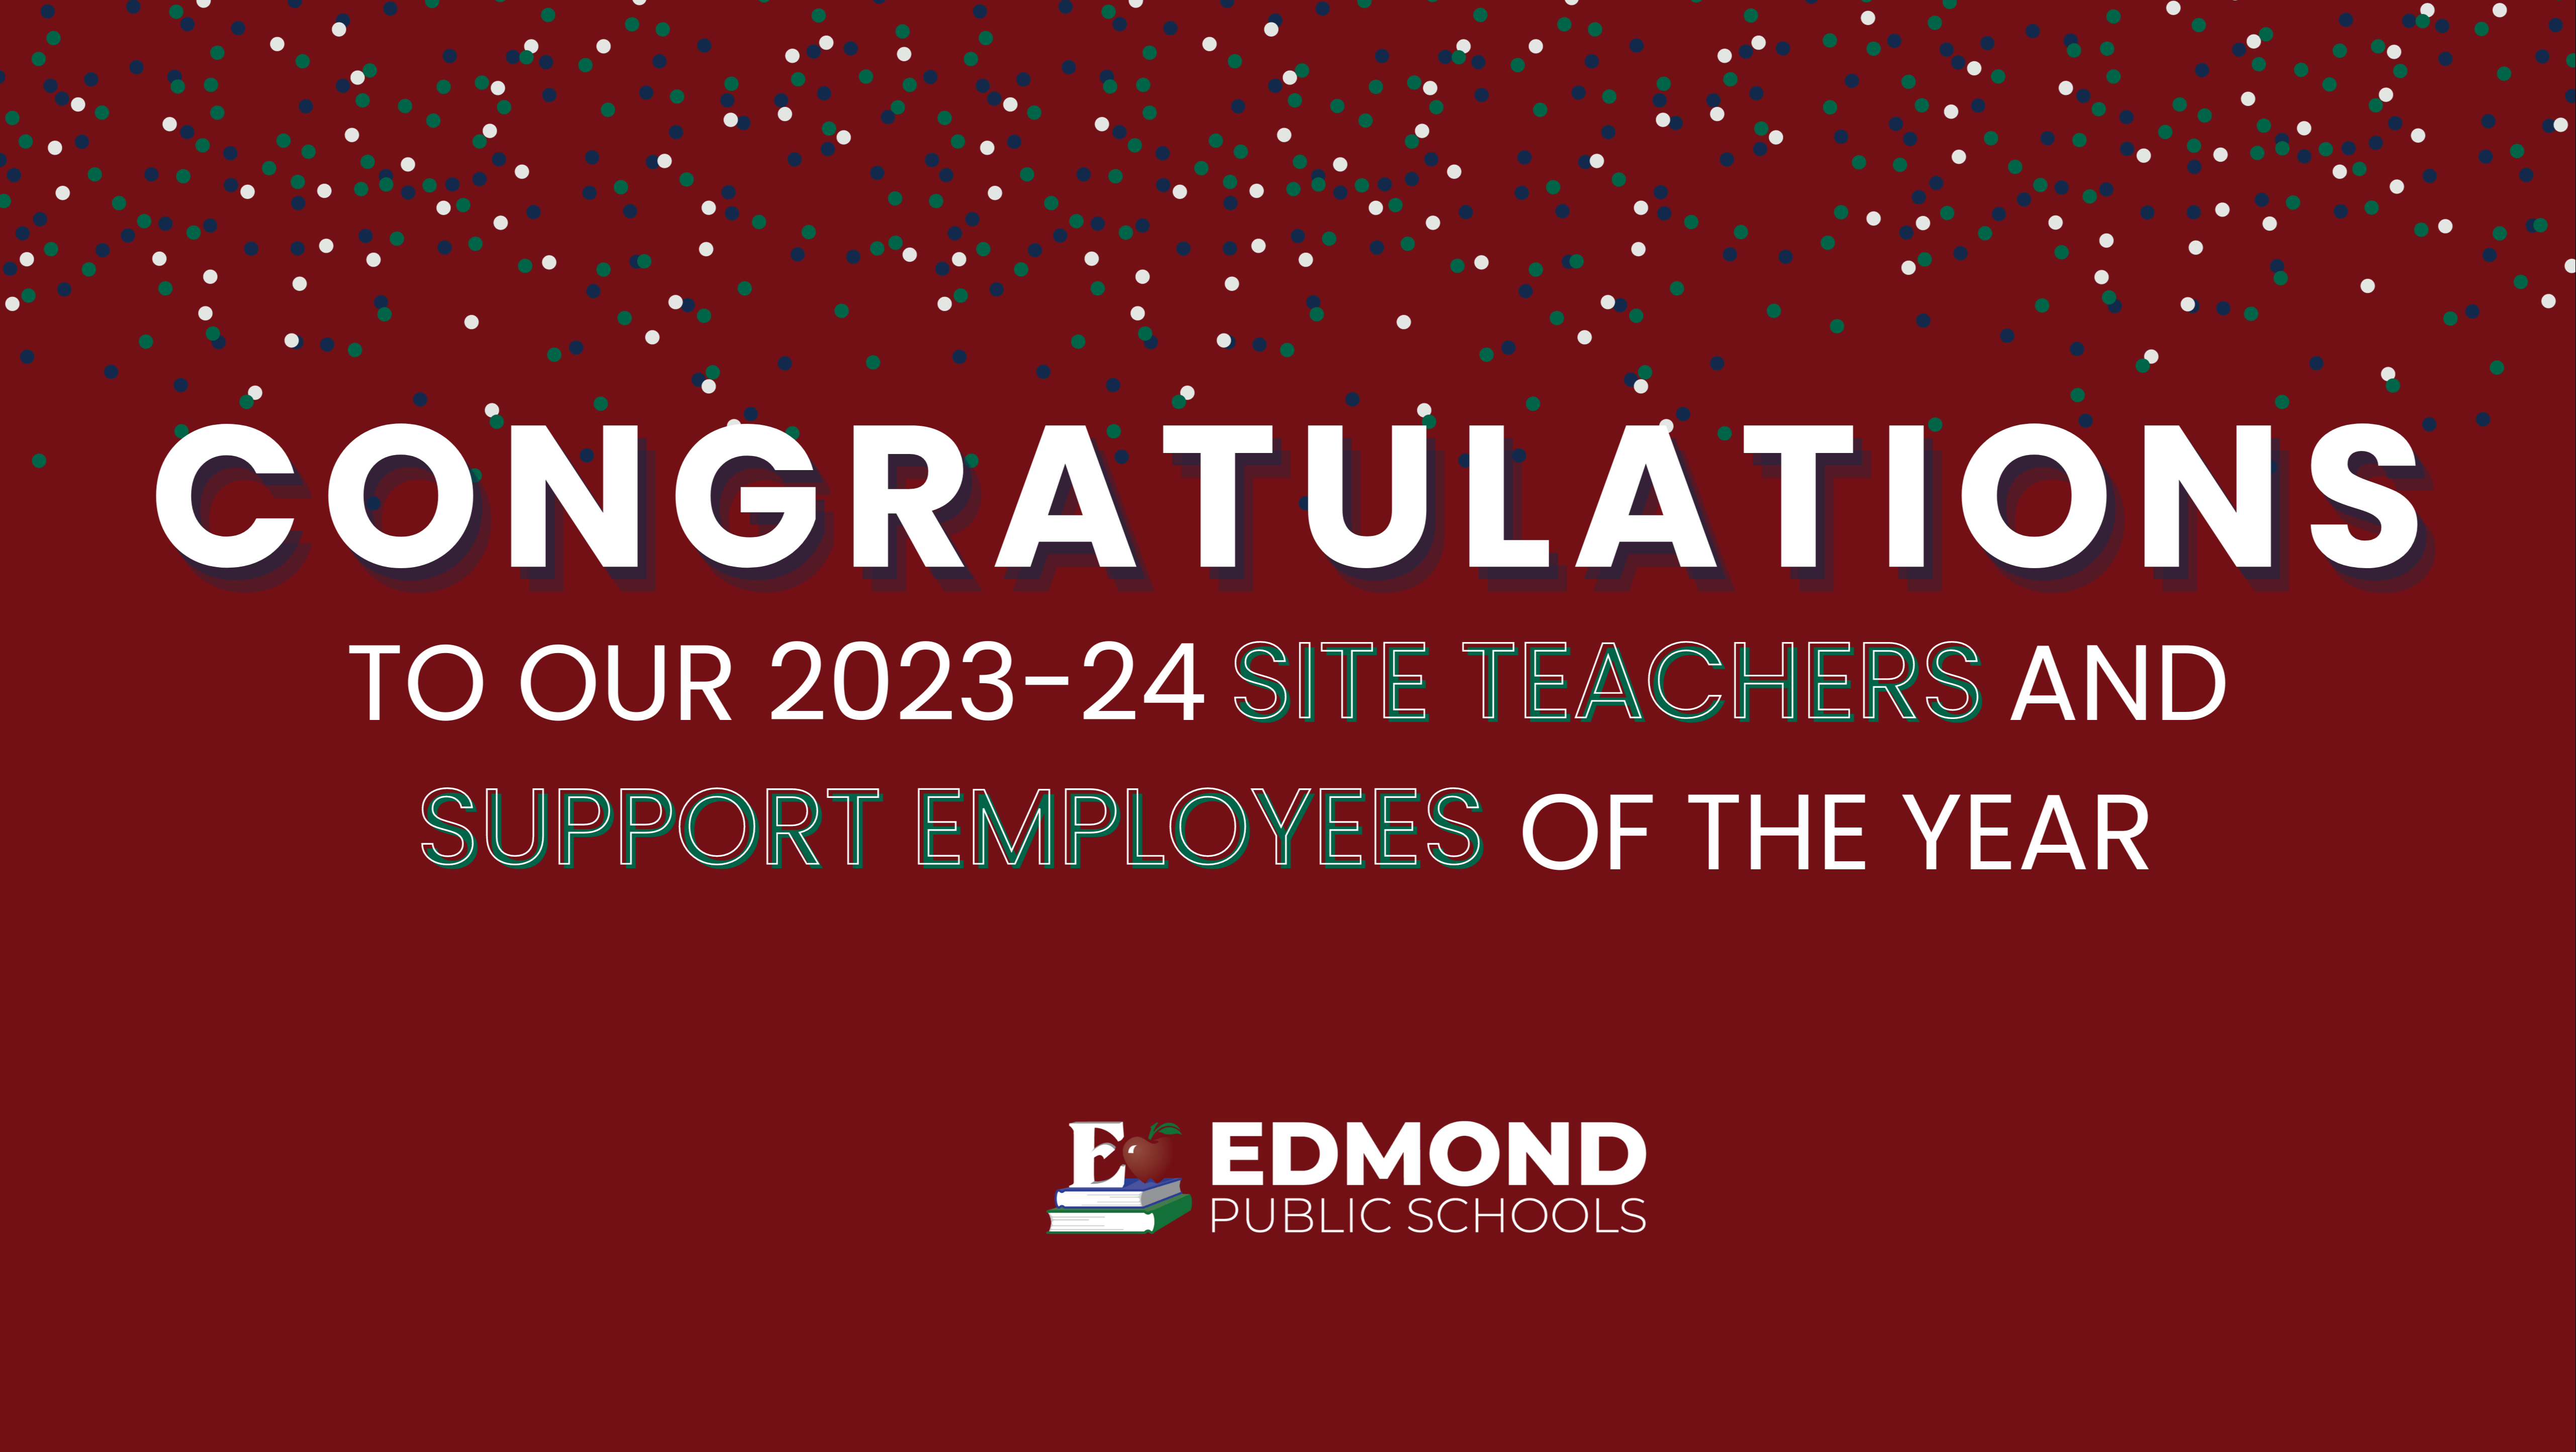 Congratulations to our site teachers of the year